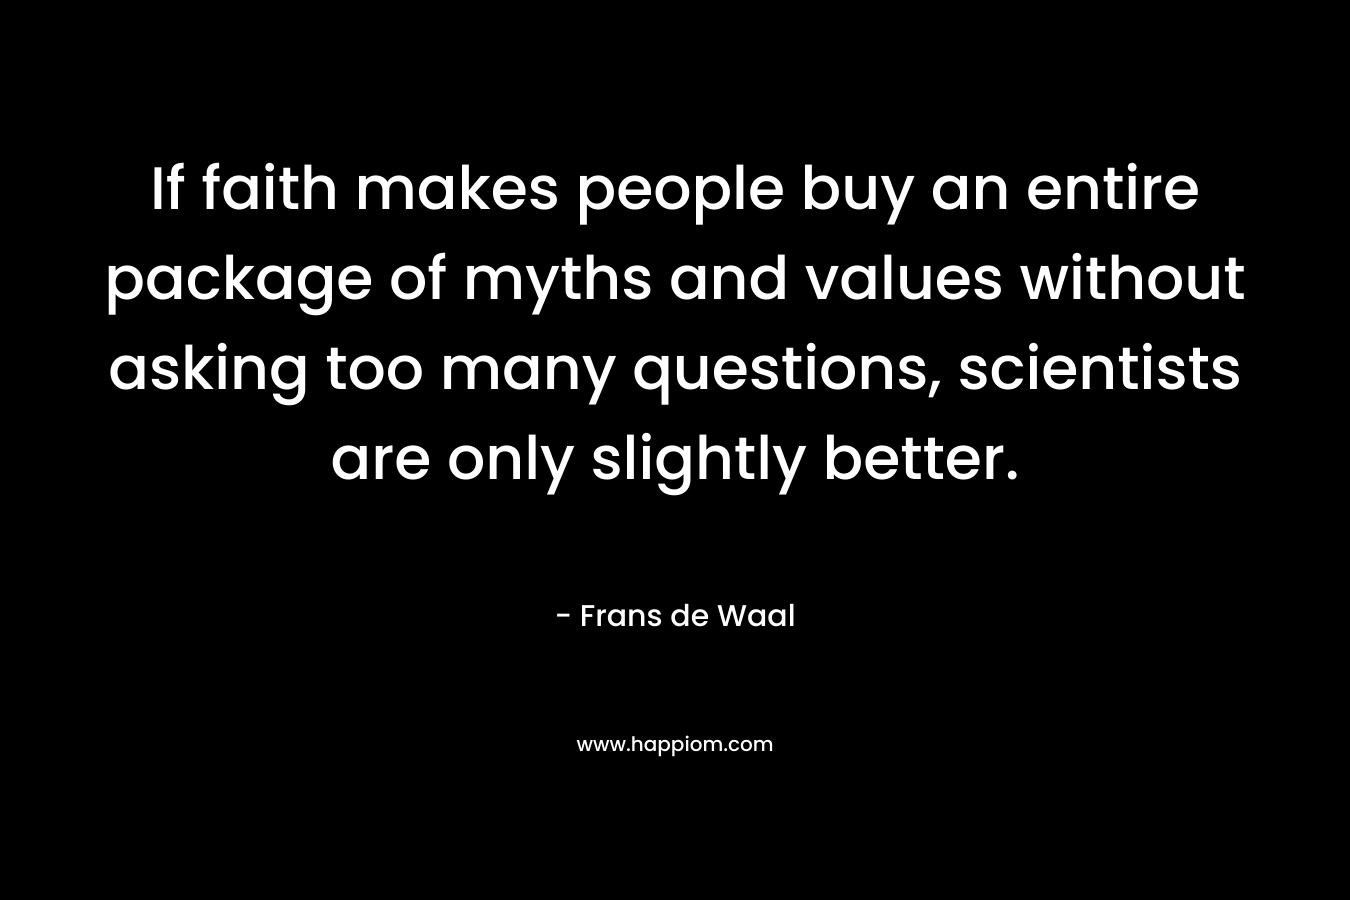 If faith makes people buy an entire package of myths and values without asking too many questions, scientists are only slightly better. – Frans de Waal